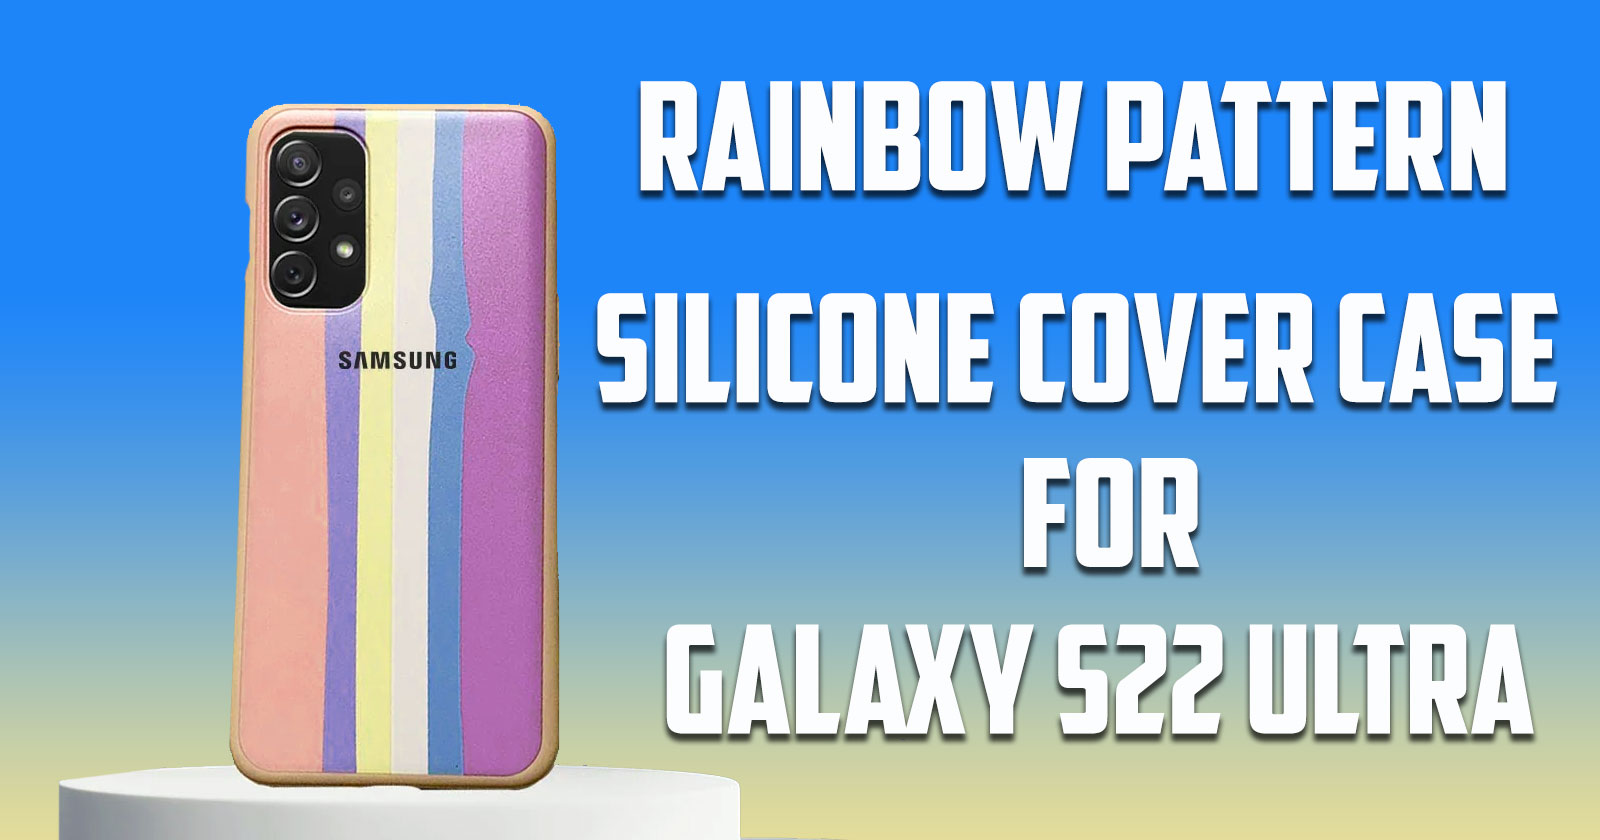 Rainbow Pattern Silicone Cover Case for Samsung Galaxy S22 Ultra